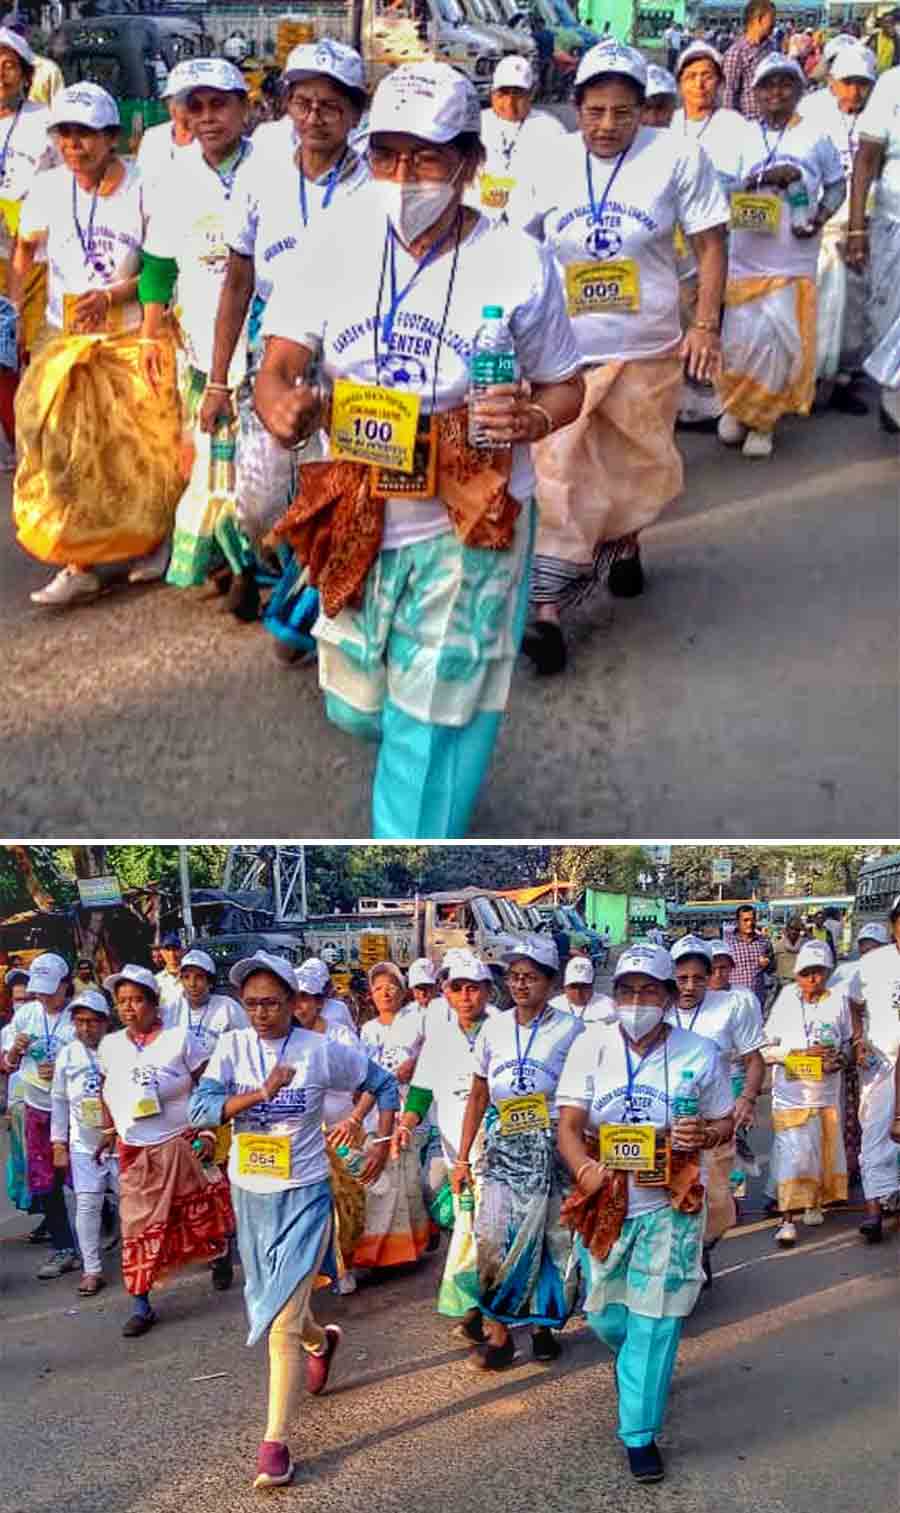 Garden Reach Football Coaching Centre held ‘All Bengal Walking Competition’ with senior citizens on Sunday  